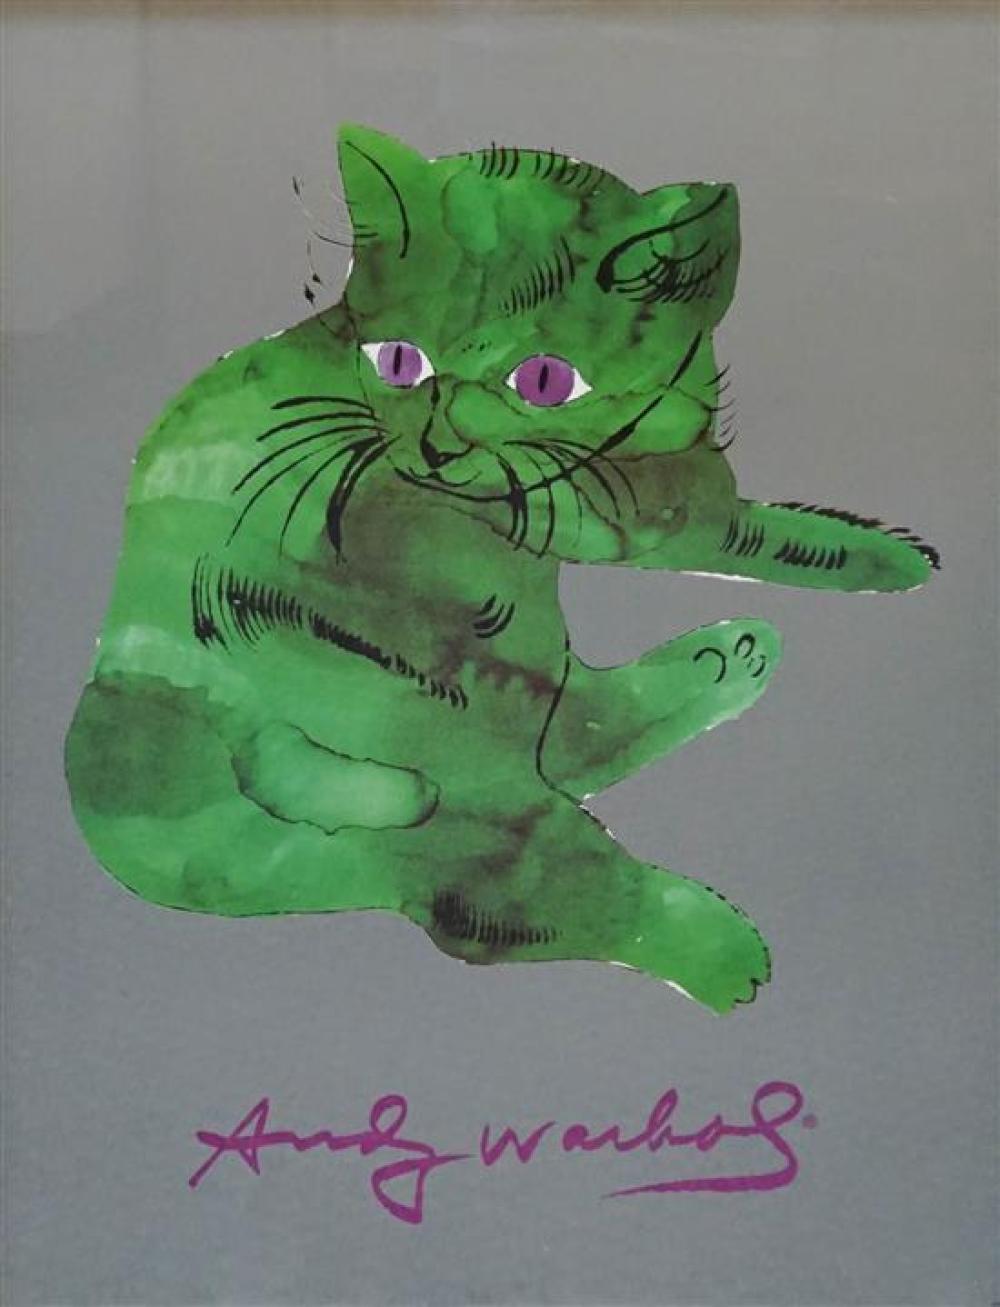 AFTER ANDY WARHOL, GREEN CAT, REPRODUCTION